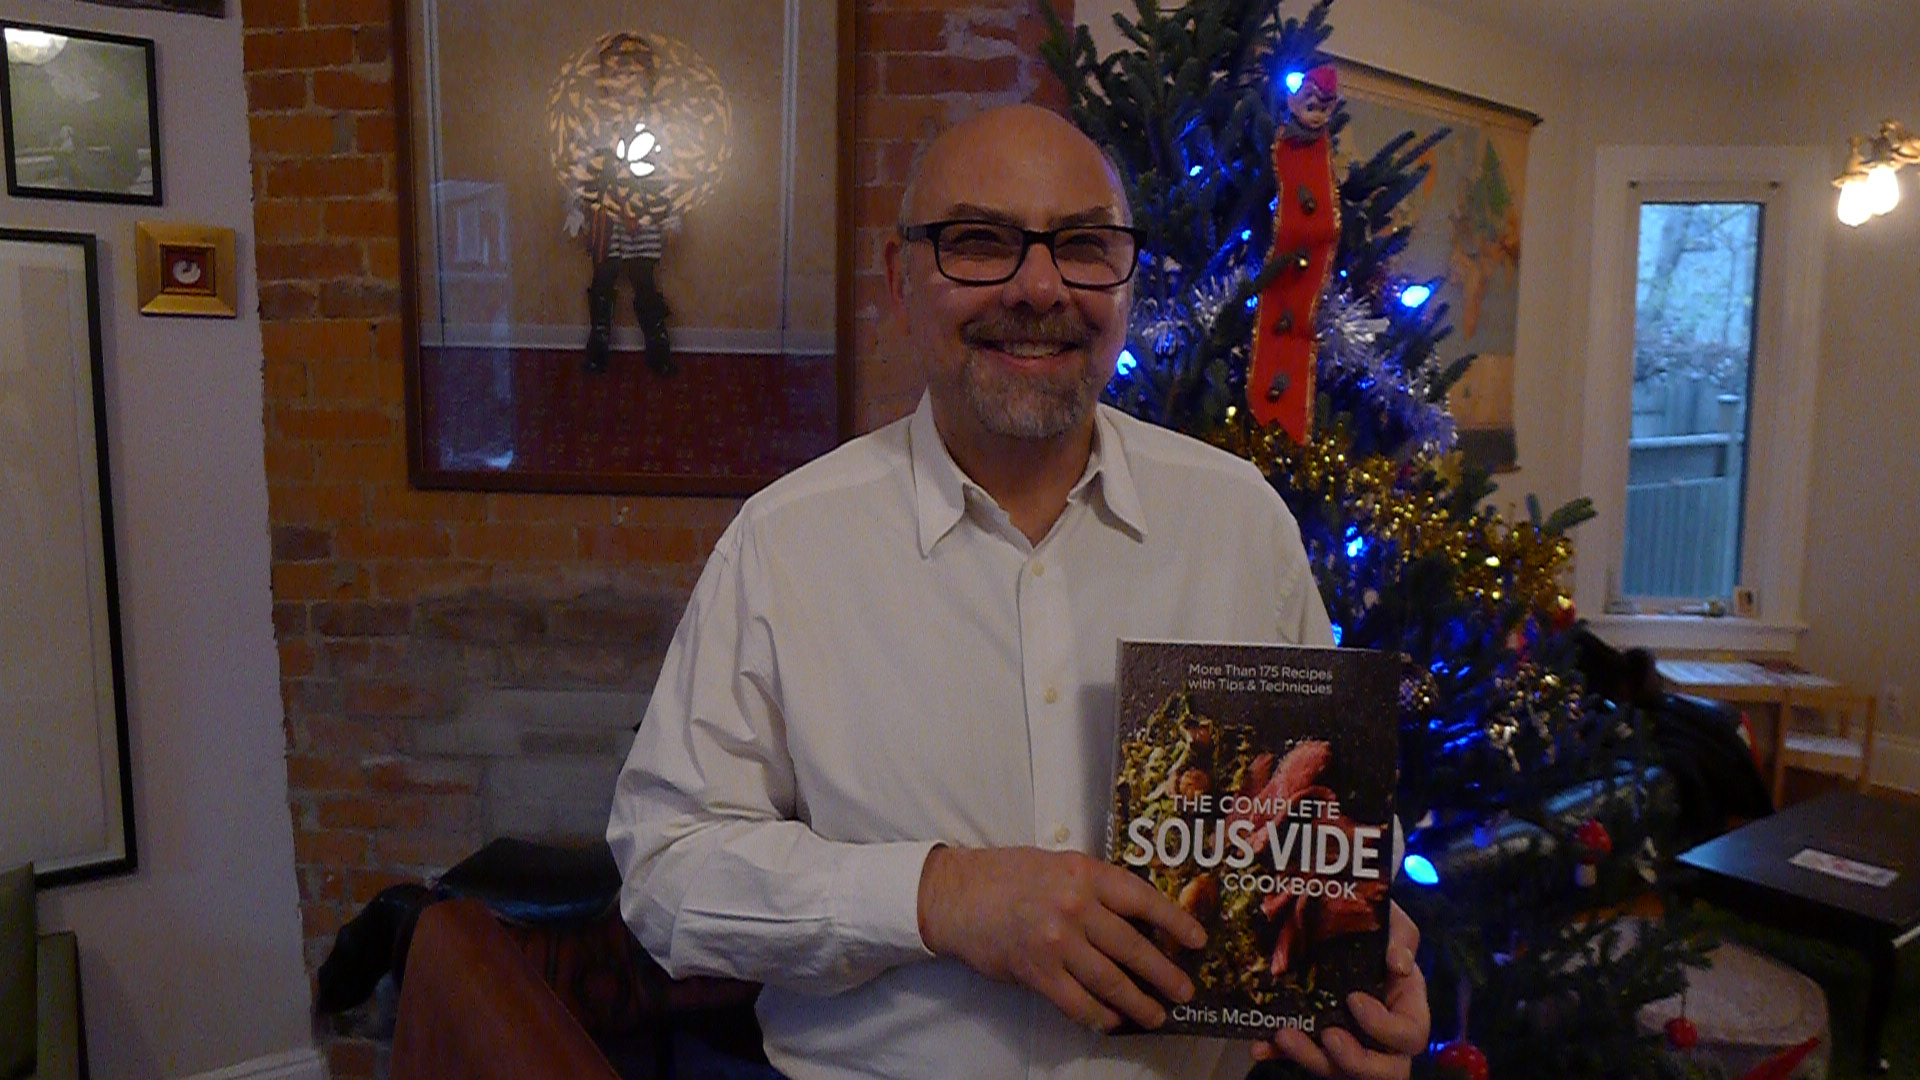 Chef Chris McDonald is quite proud of his long-researched book on sous vide cooking, and rightfully so!